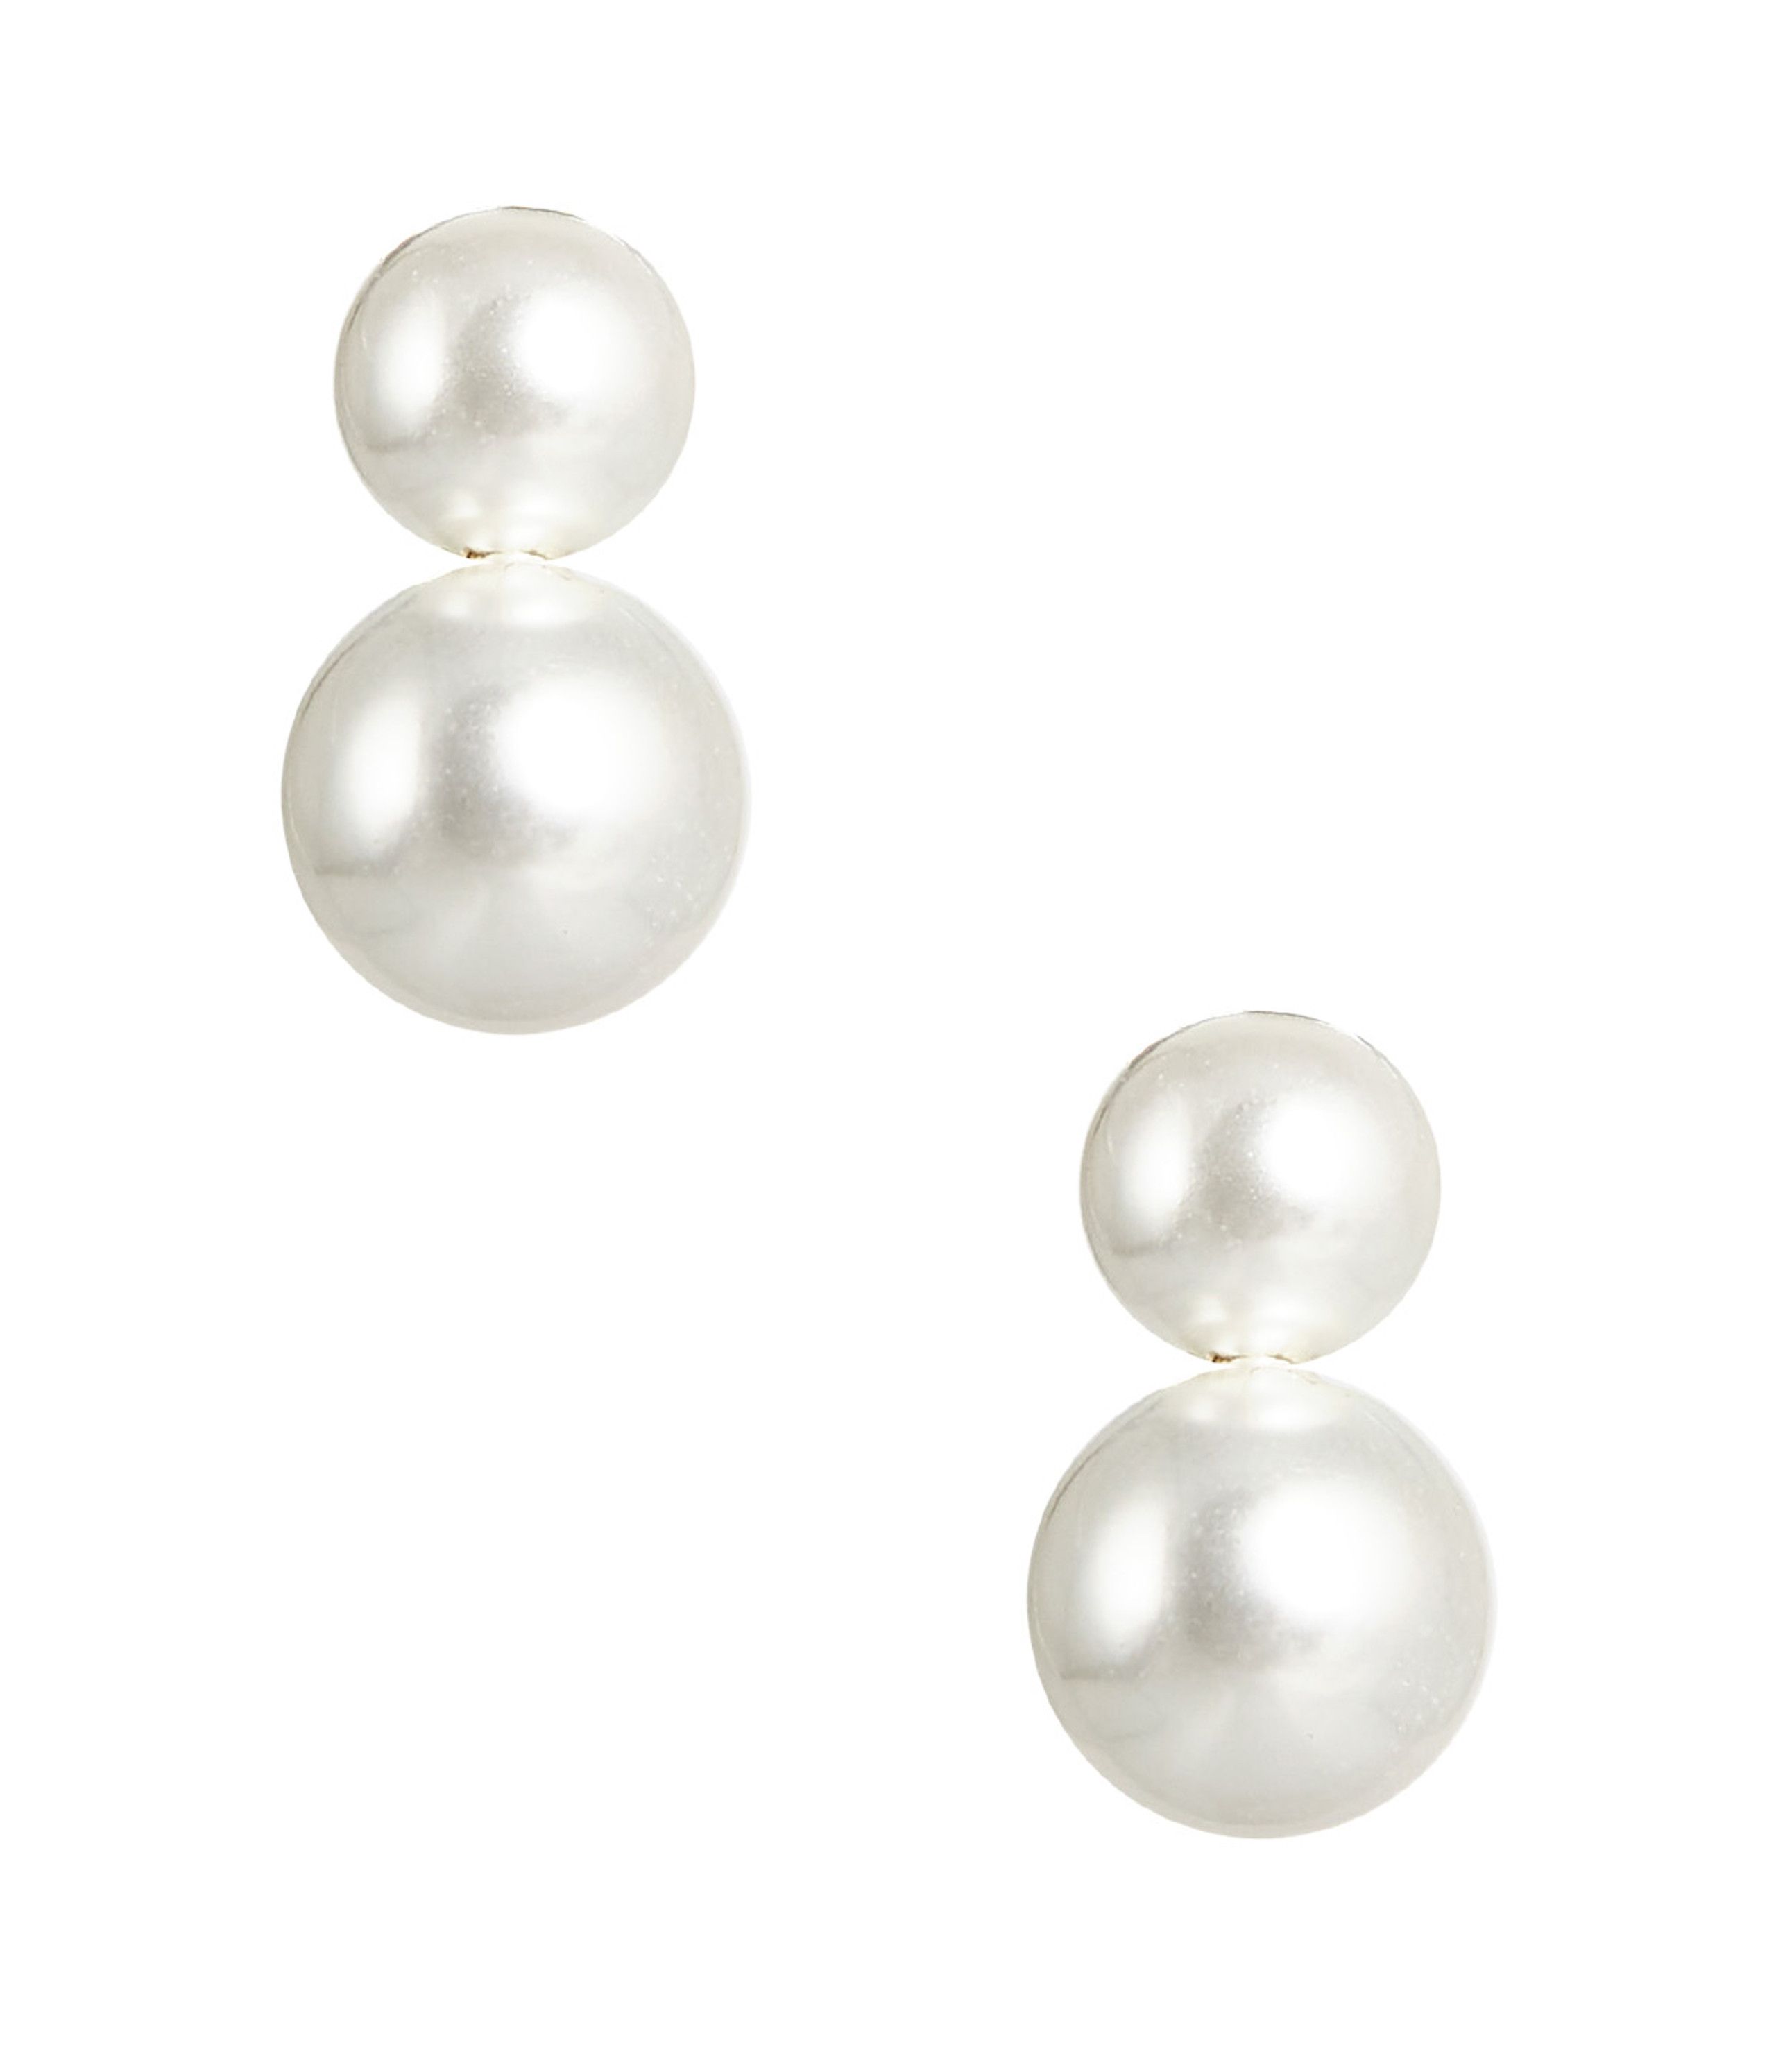 Audrey - Double Pearl earrings - Belle of  the Ball | Lisi Lerch Inc